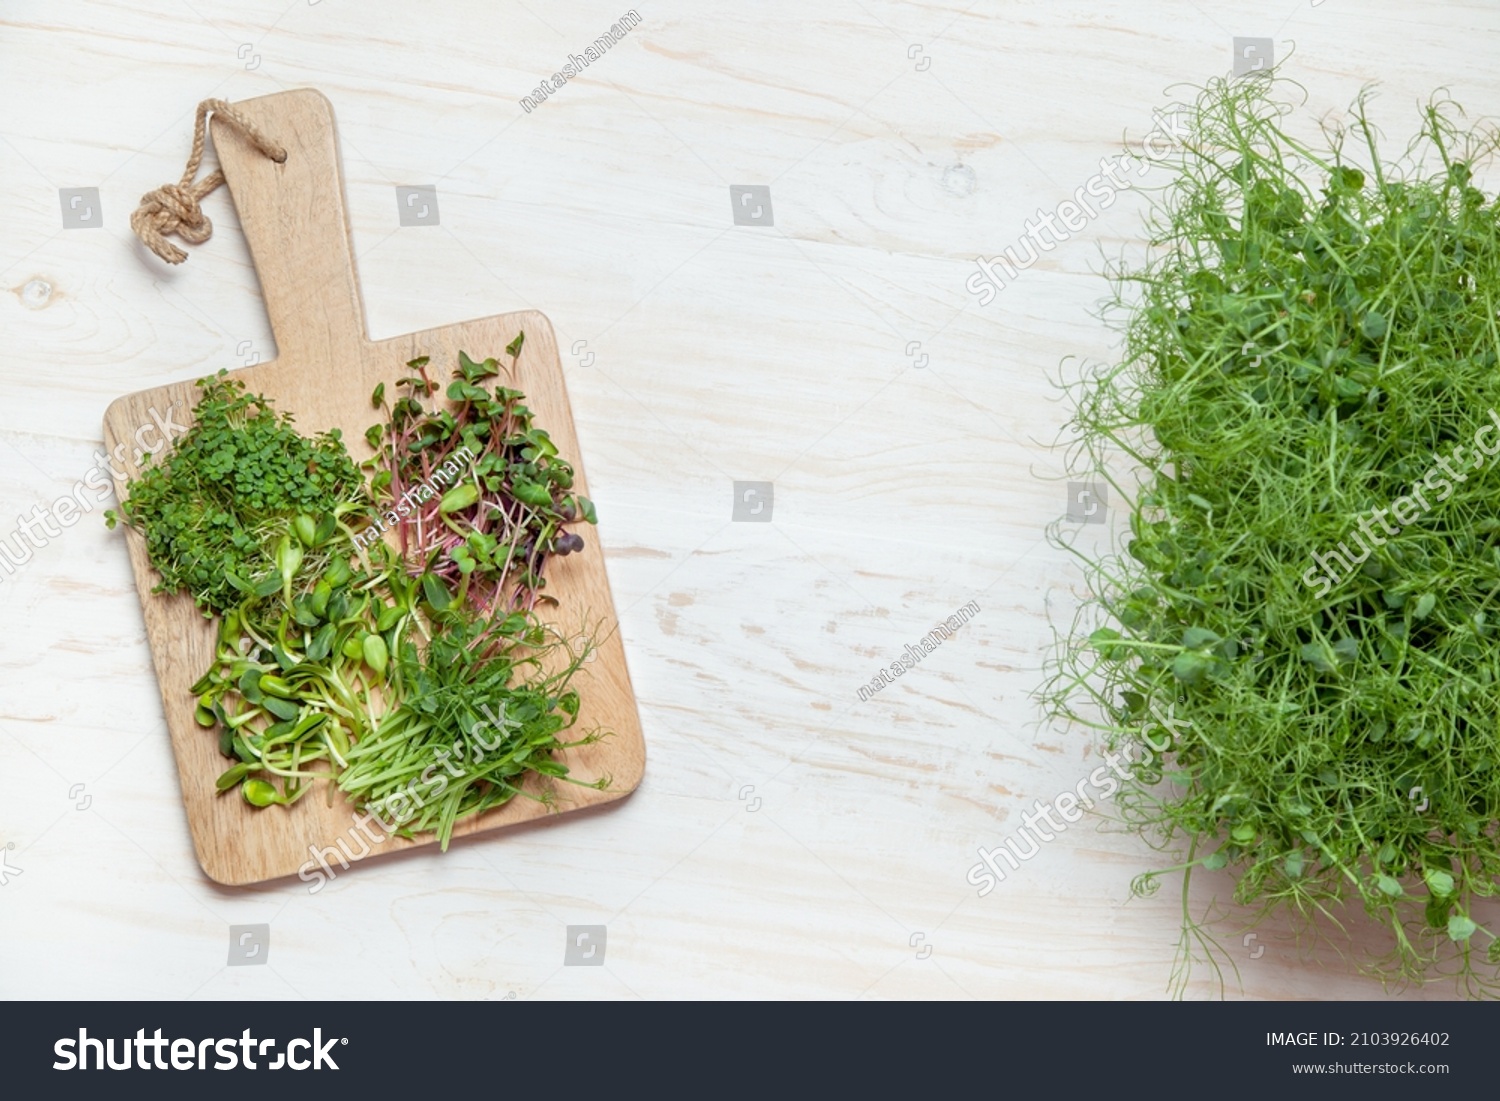 Microgreens growing on the wooden table. Top view. #2103926402